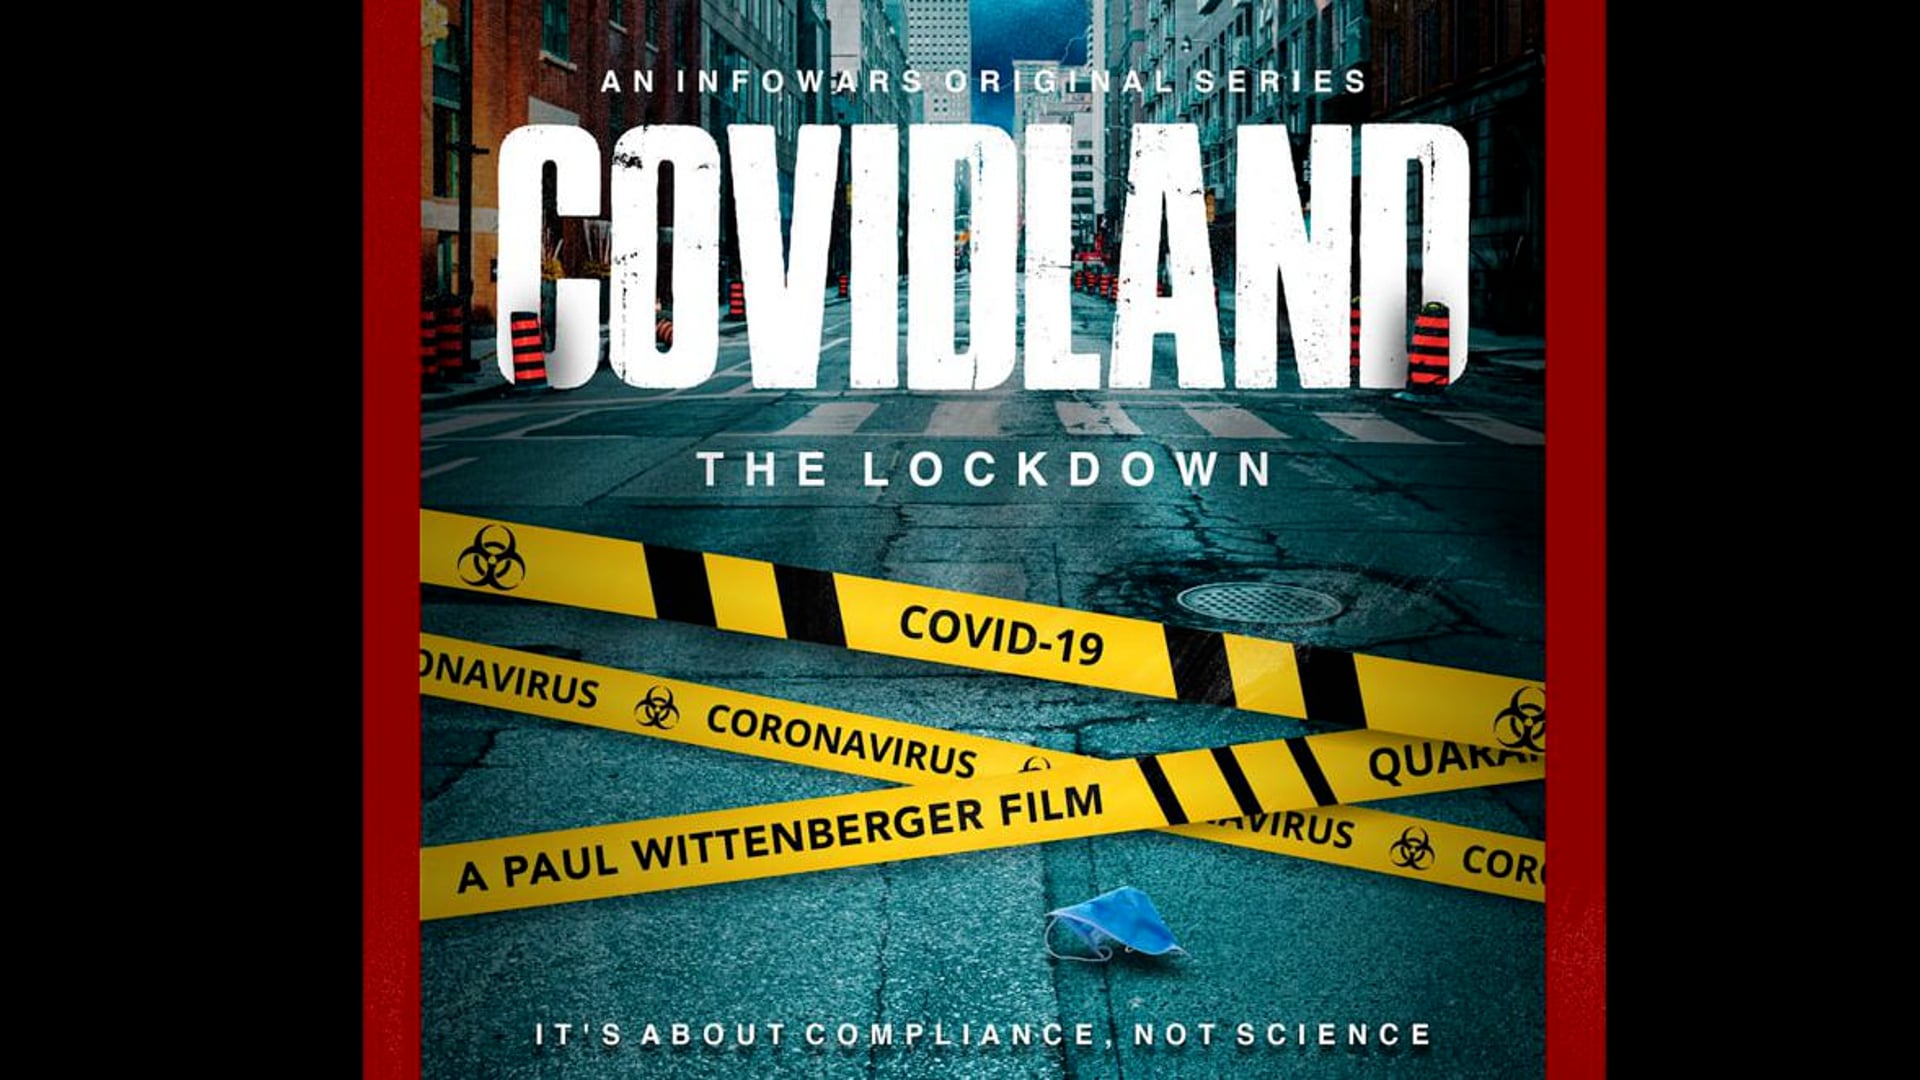 Covidland: The Lockdown on ReDiscover Television